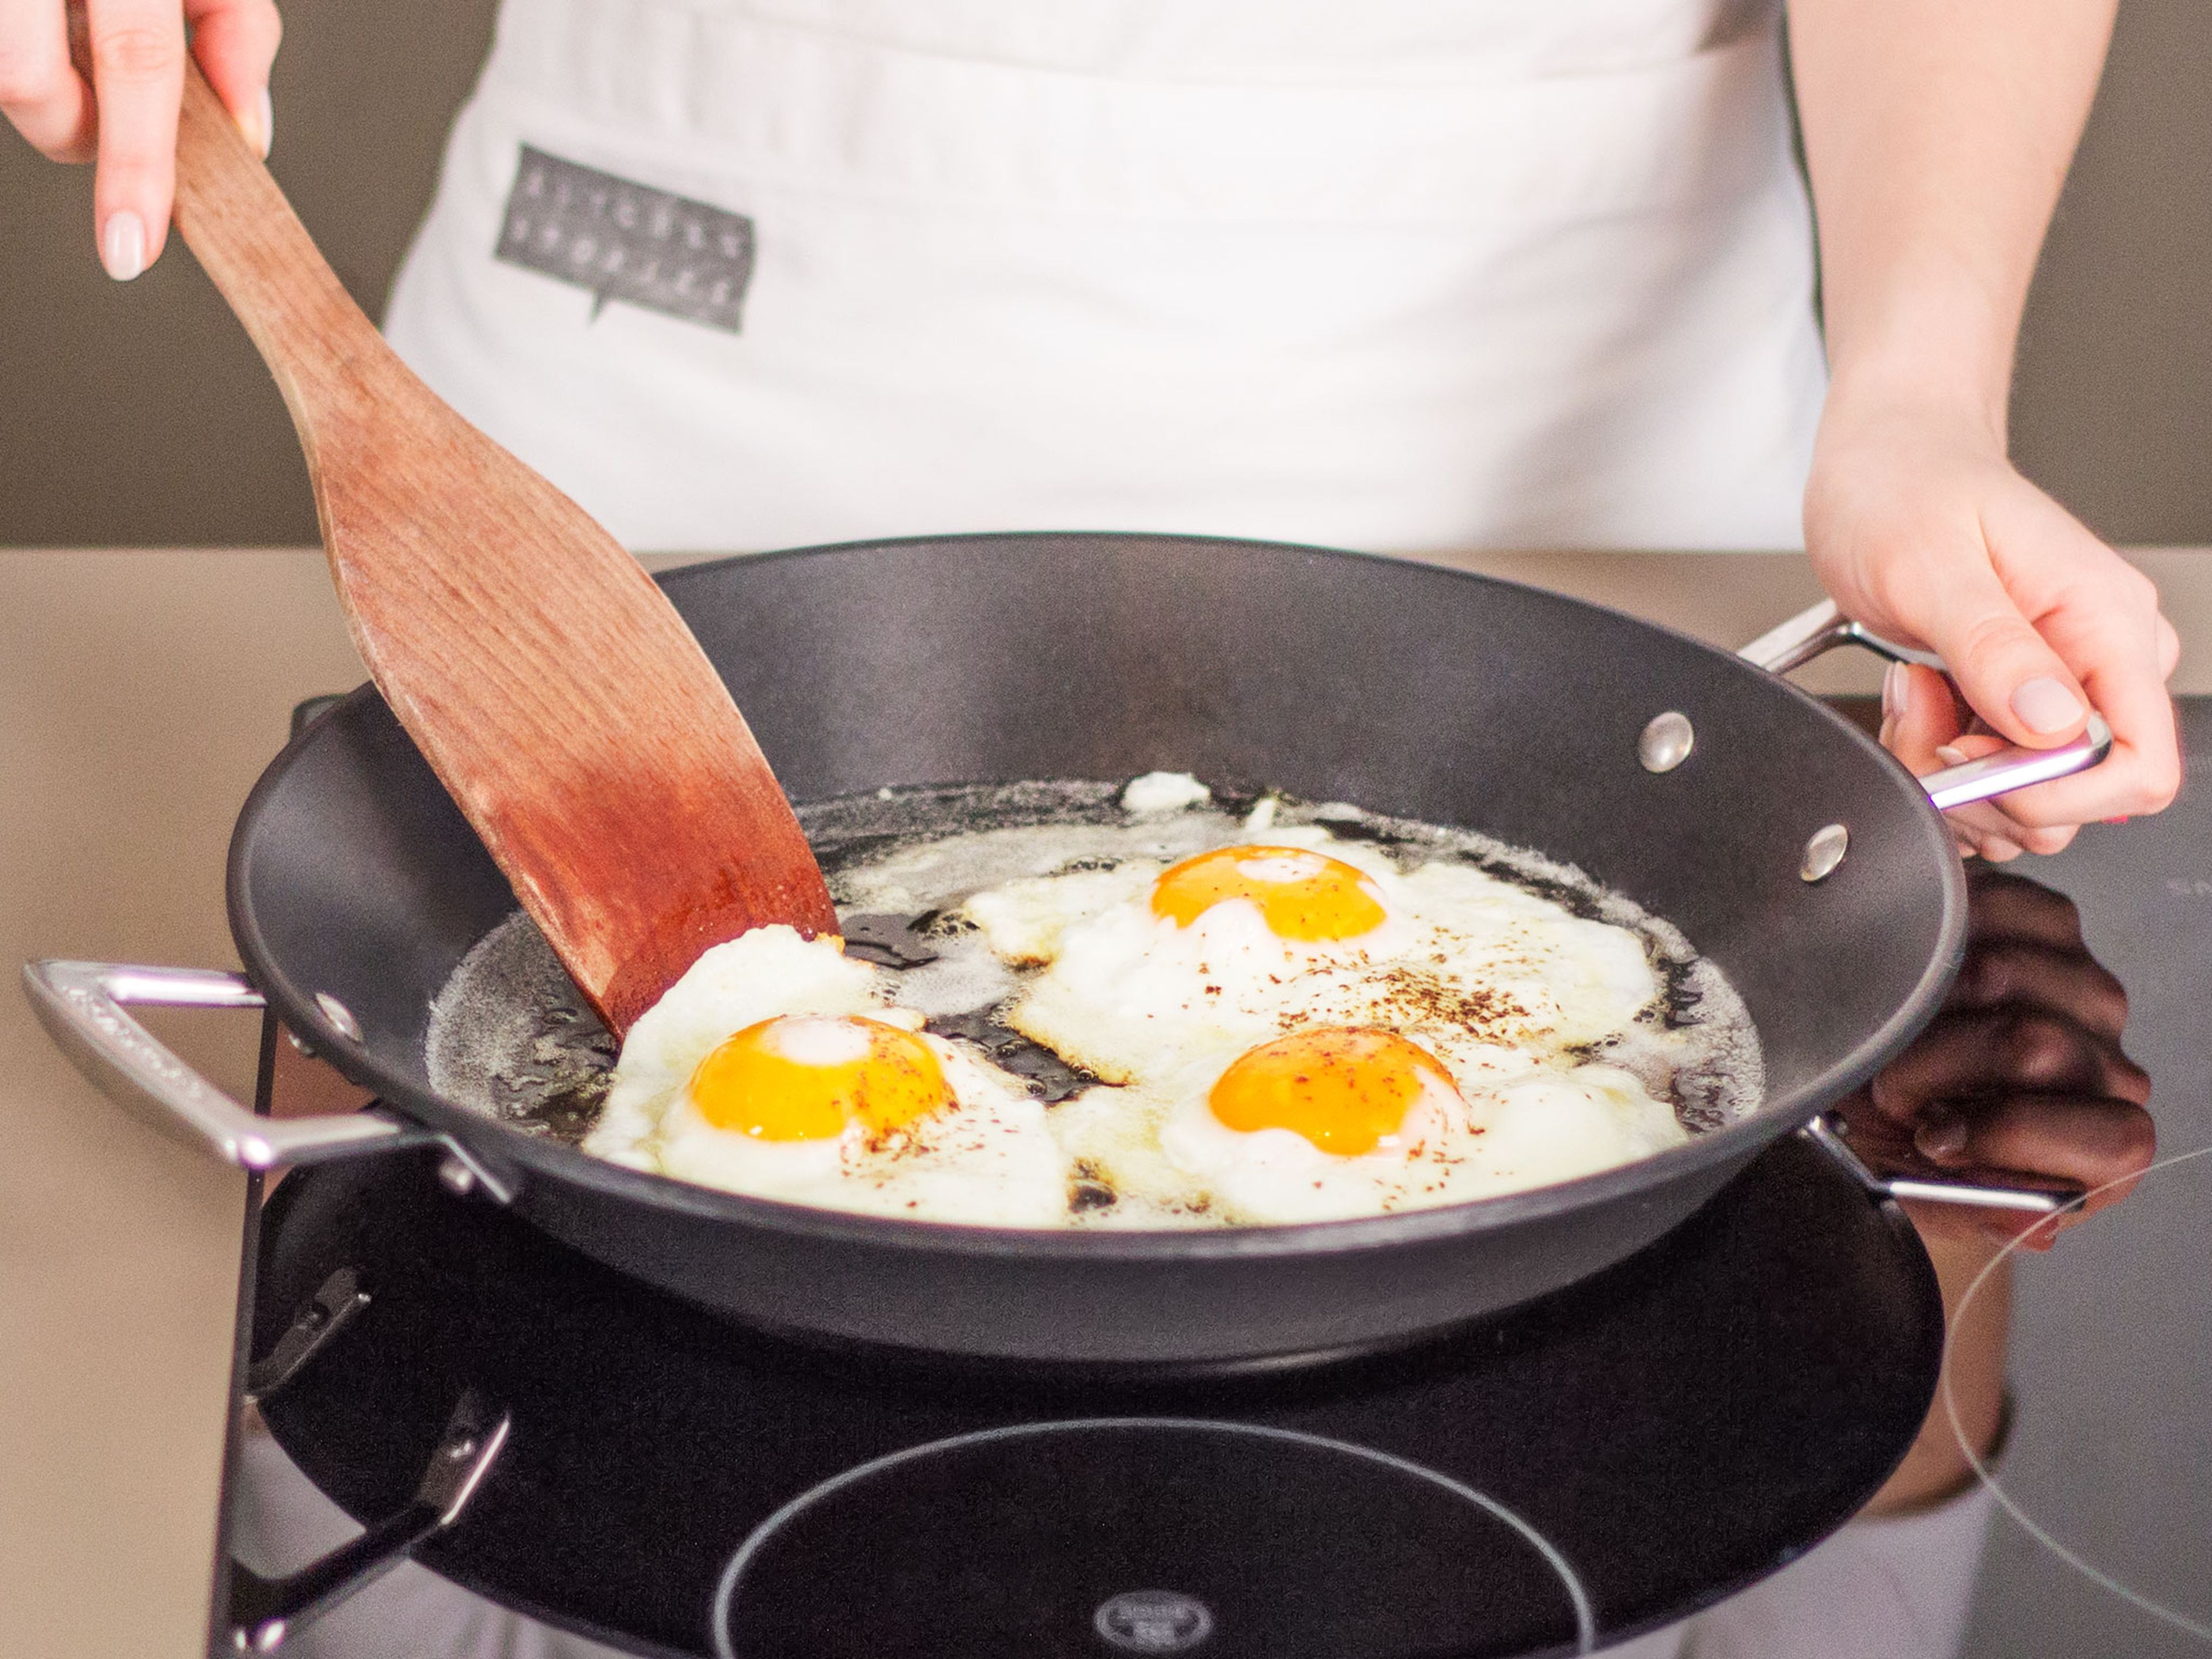 In a separate large frying pan, fry eggs in some vegetable oil over medium heat for approx. 2 – 4 min. until whites are opaque and yolks begin to set. Then, transfer fried eggs to pan with meatballs. Enjoy with a side of our signature hot chili sauce!